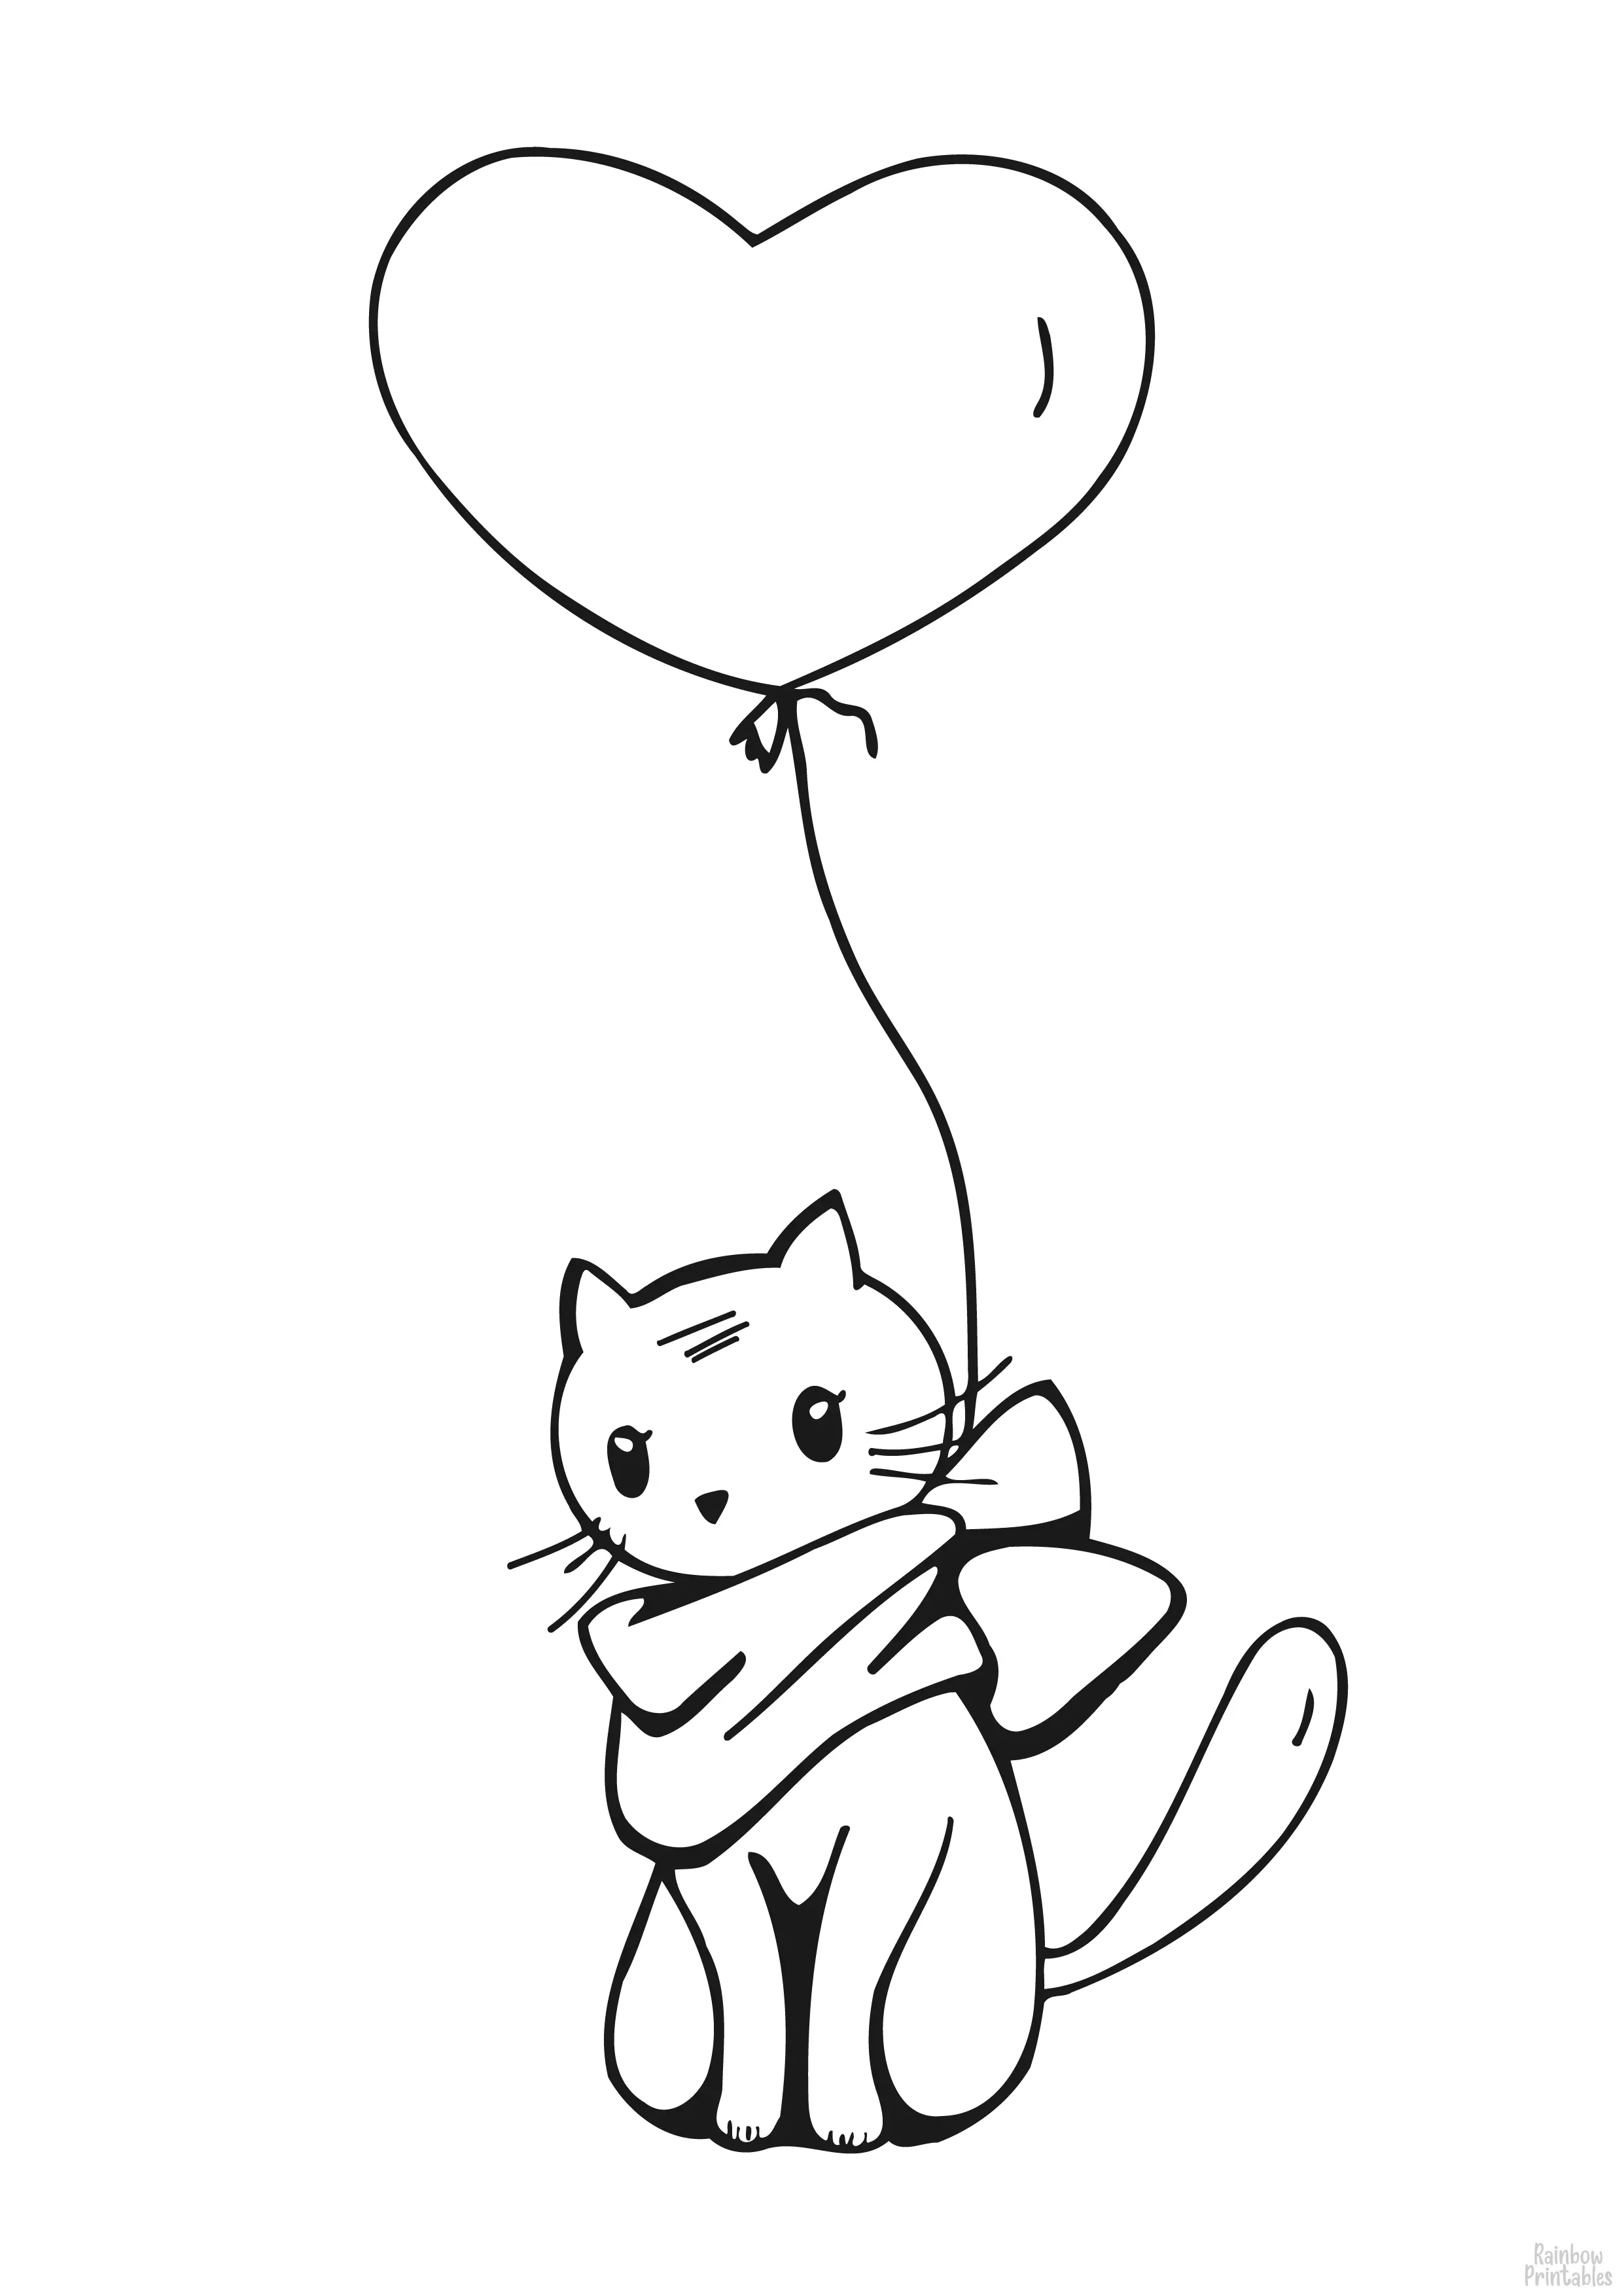 CUTE CAT BALLOON VALENTINE'S DAY Clipart Coloring Pages for Kids Adults Art Activities Line Art